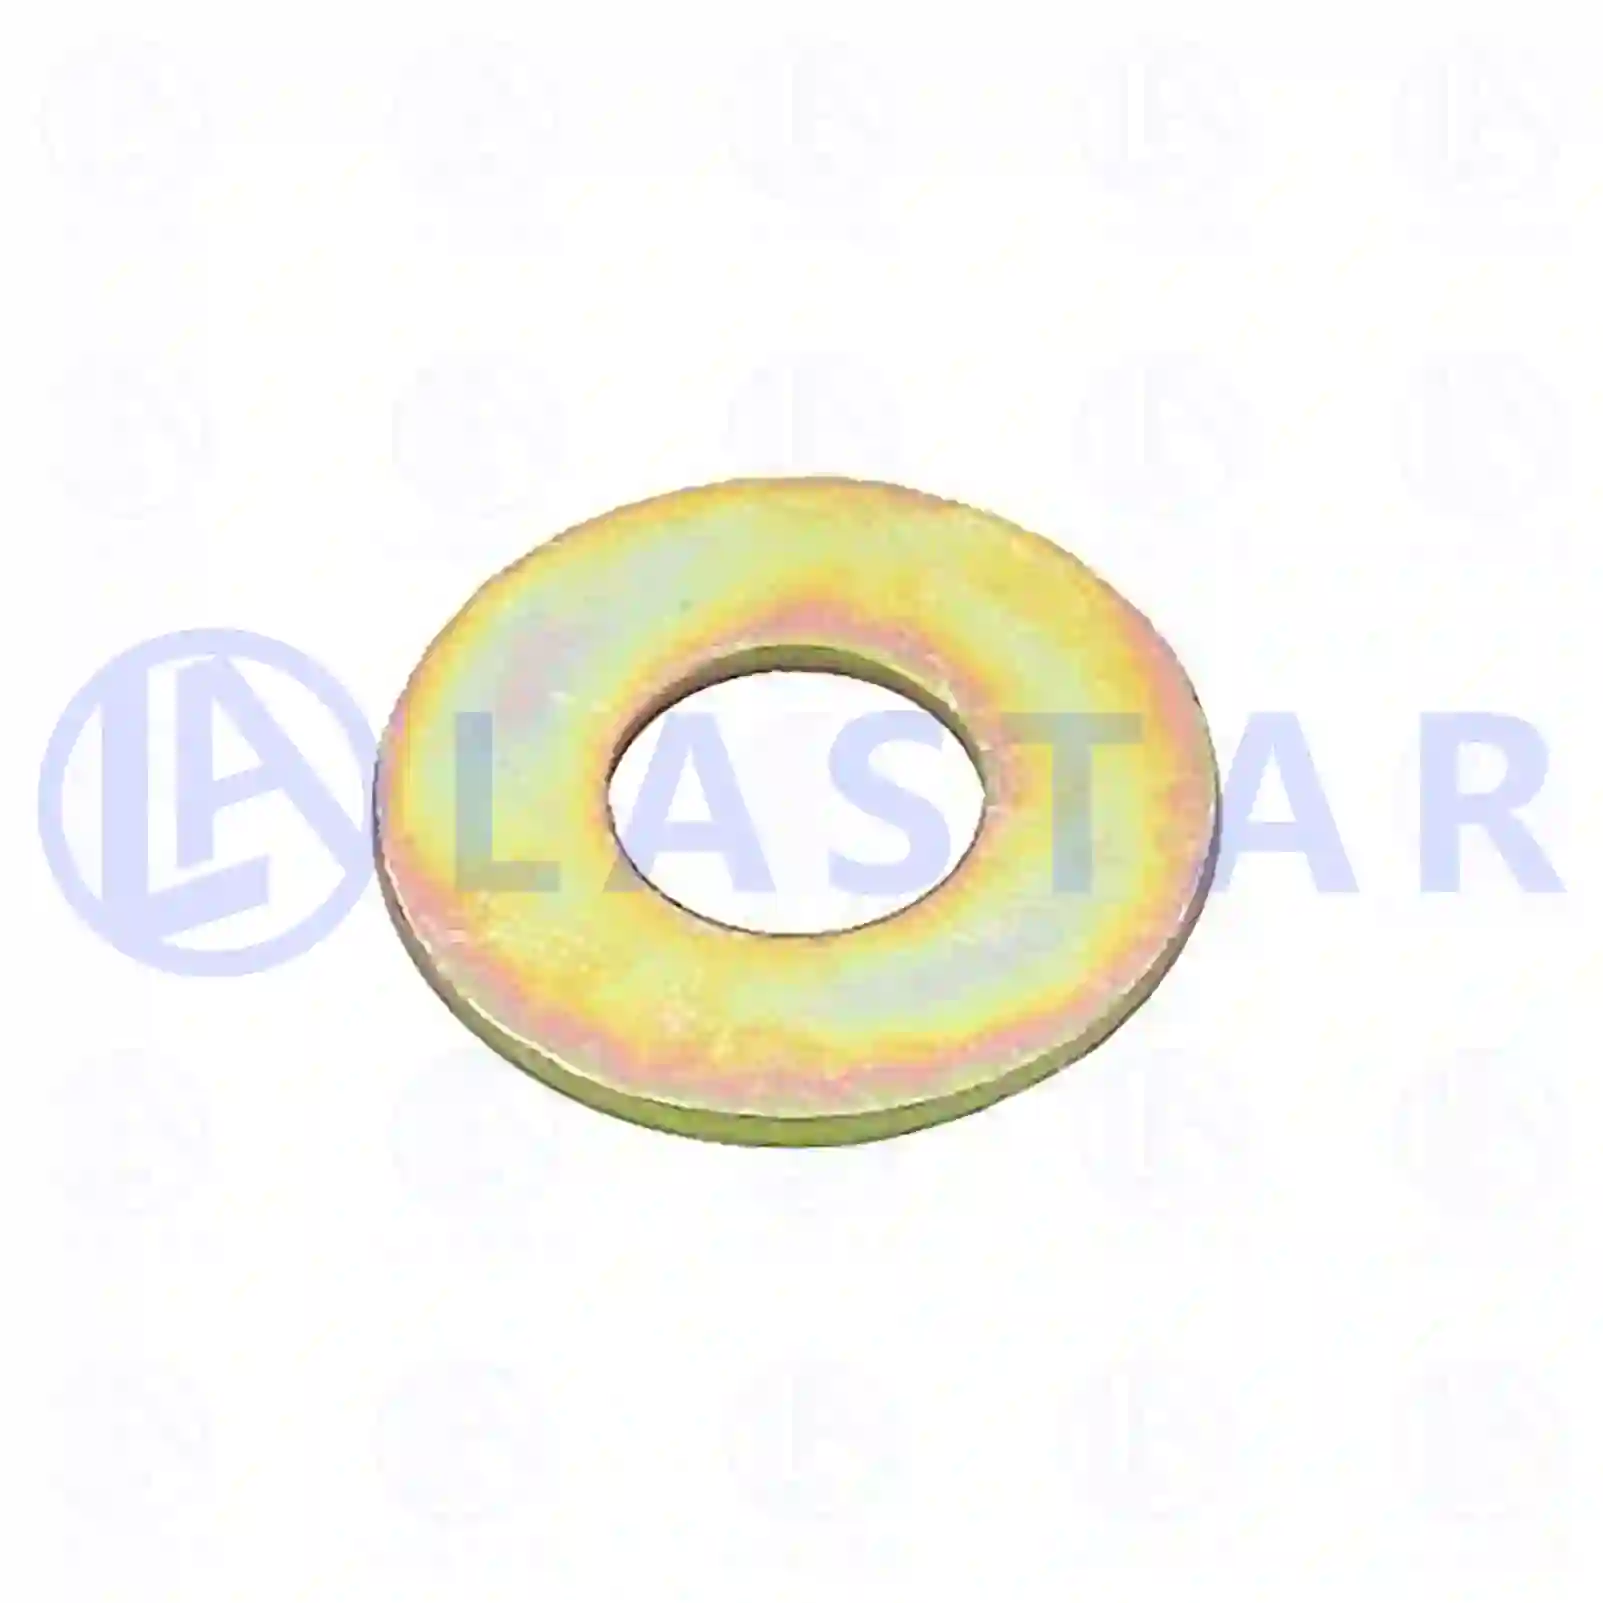 Washer, 77728478, 0296705, 296705, ZG41887-0008 ||  77728478 Lastar Spare Part | Truck Spare Parts, Auotomotive Spare Parts Washer, 77728478, 0296705, 296705, ZG41887-0008 ||  77728478 Lastar Spare Part | Truck Spare Parts, Auotomotive Spare Parts